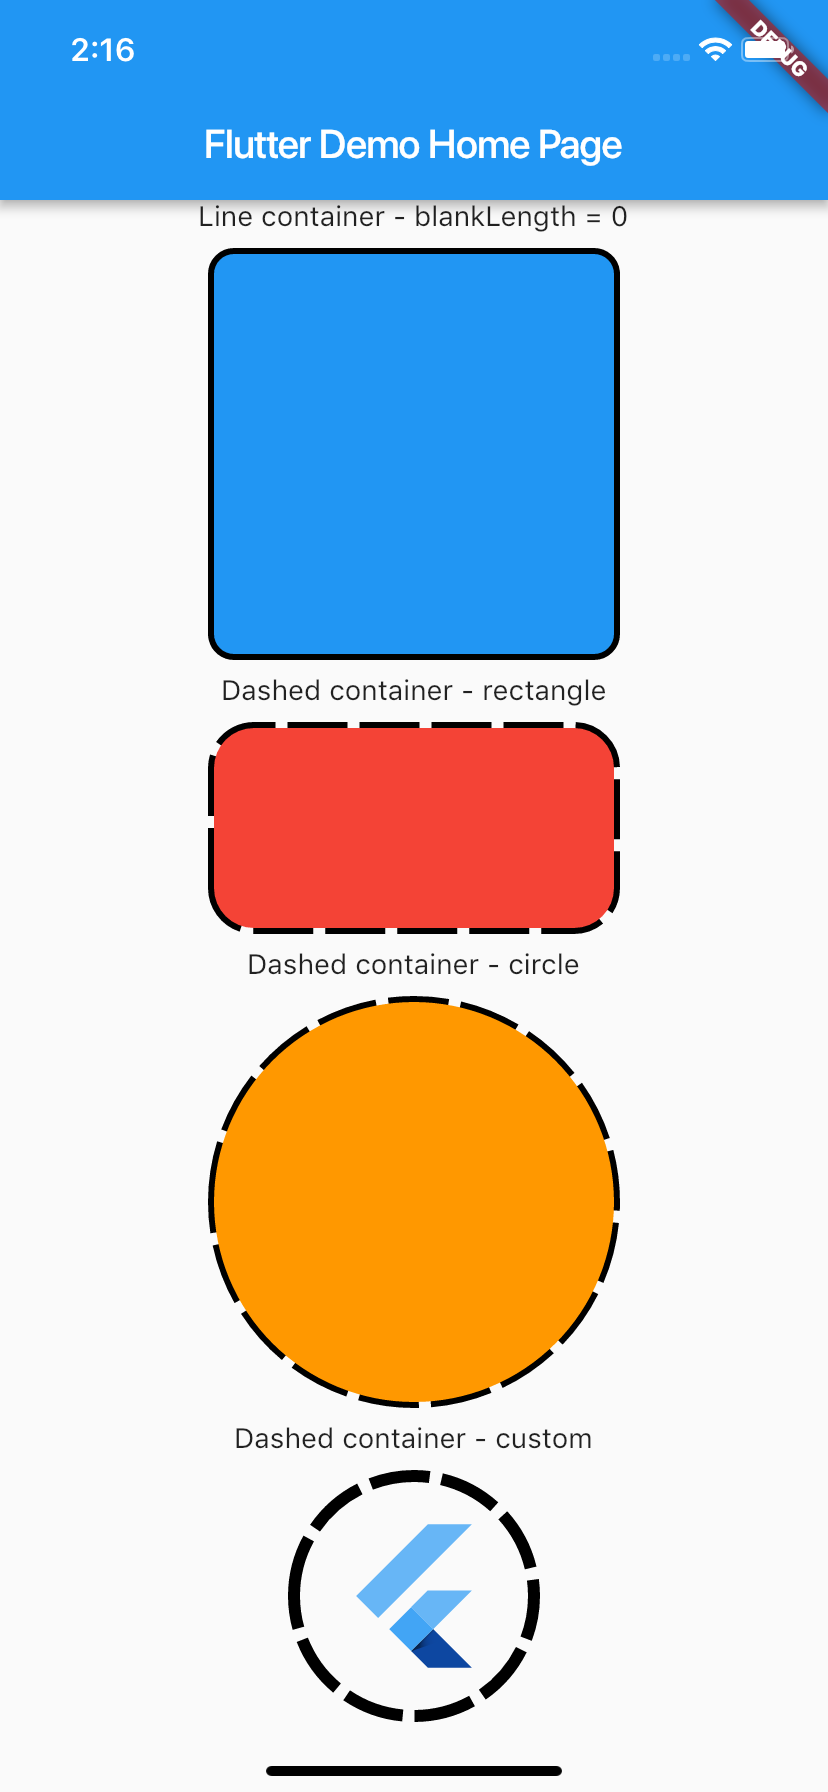 dashed_container